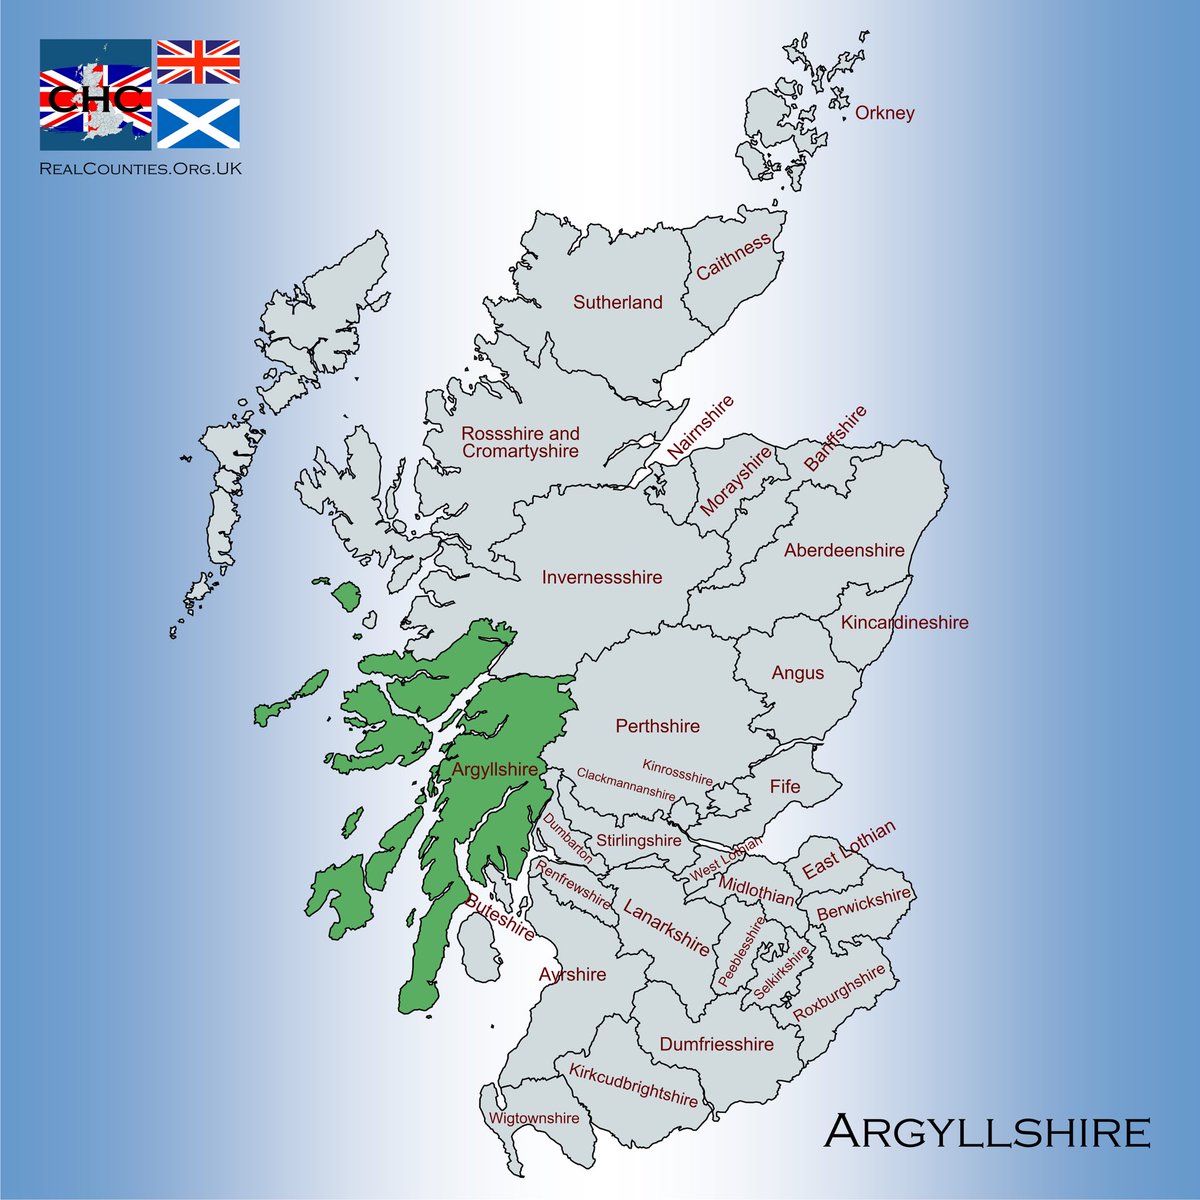 The County of #Argyll is a shire of mountains, peninsulas and islands.

#Argyllshire encompasses most of the Inner Hebrides.

It also includes the entire western coast of Scotland between the Mull of Kintyre and the Ardnamurchan peninsula.

🇬🇧 #HistoricCounties | #RealCounties 🏴󠁧󠁢󠁳󠁣󠁴󠁿